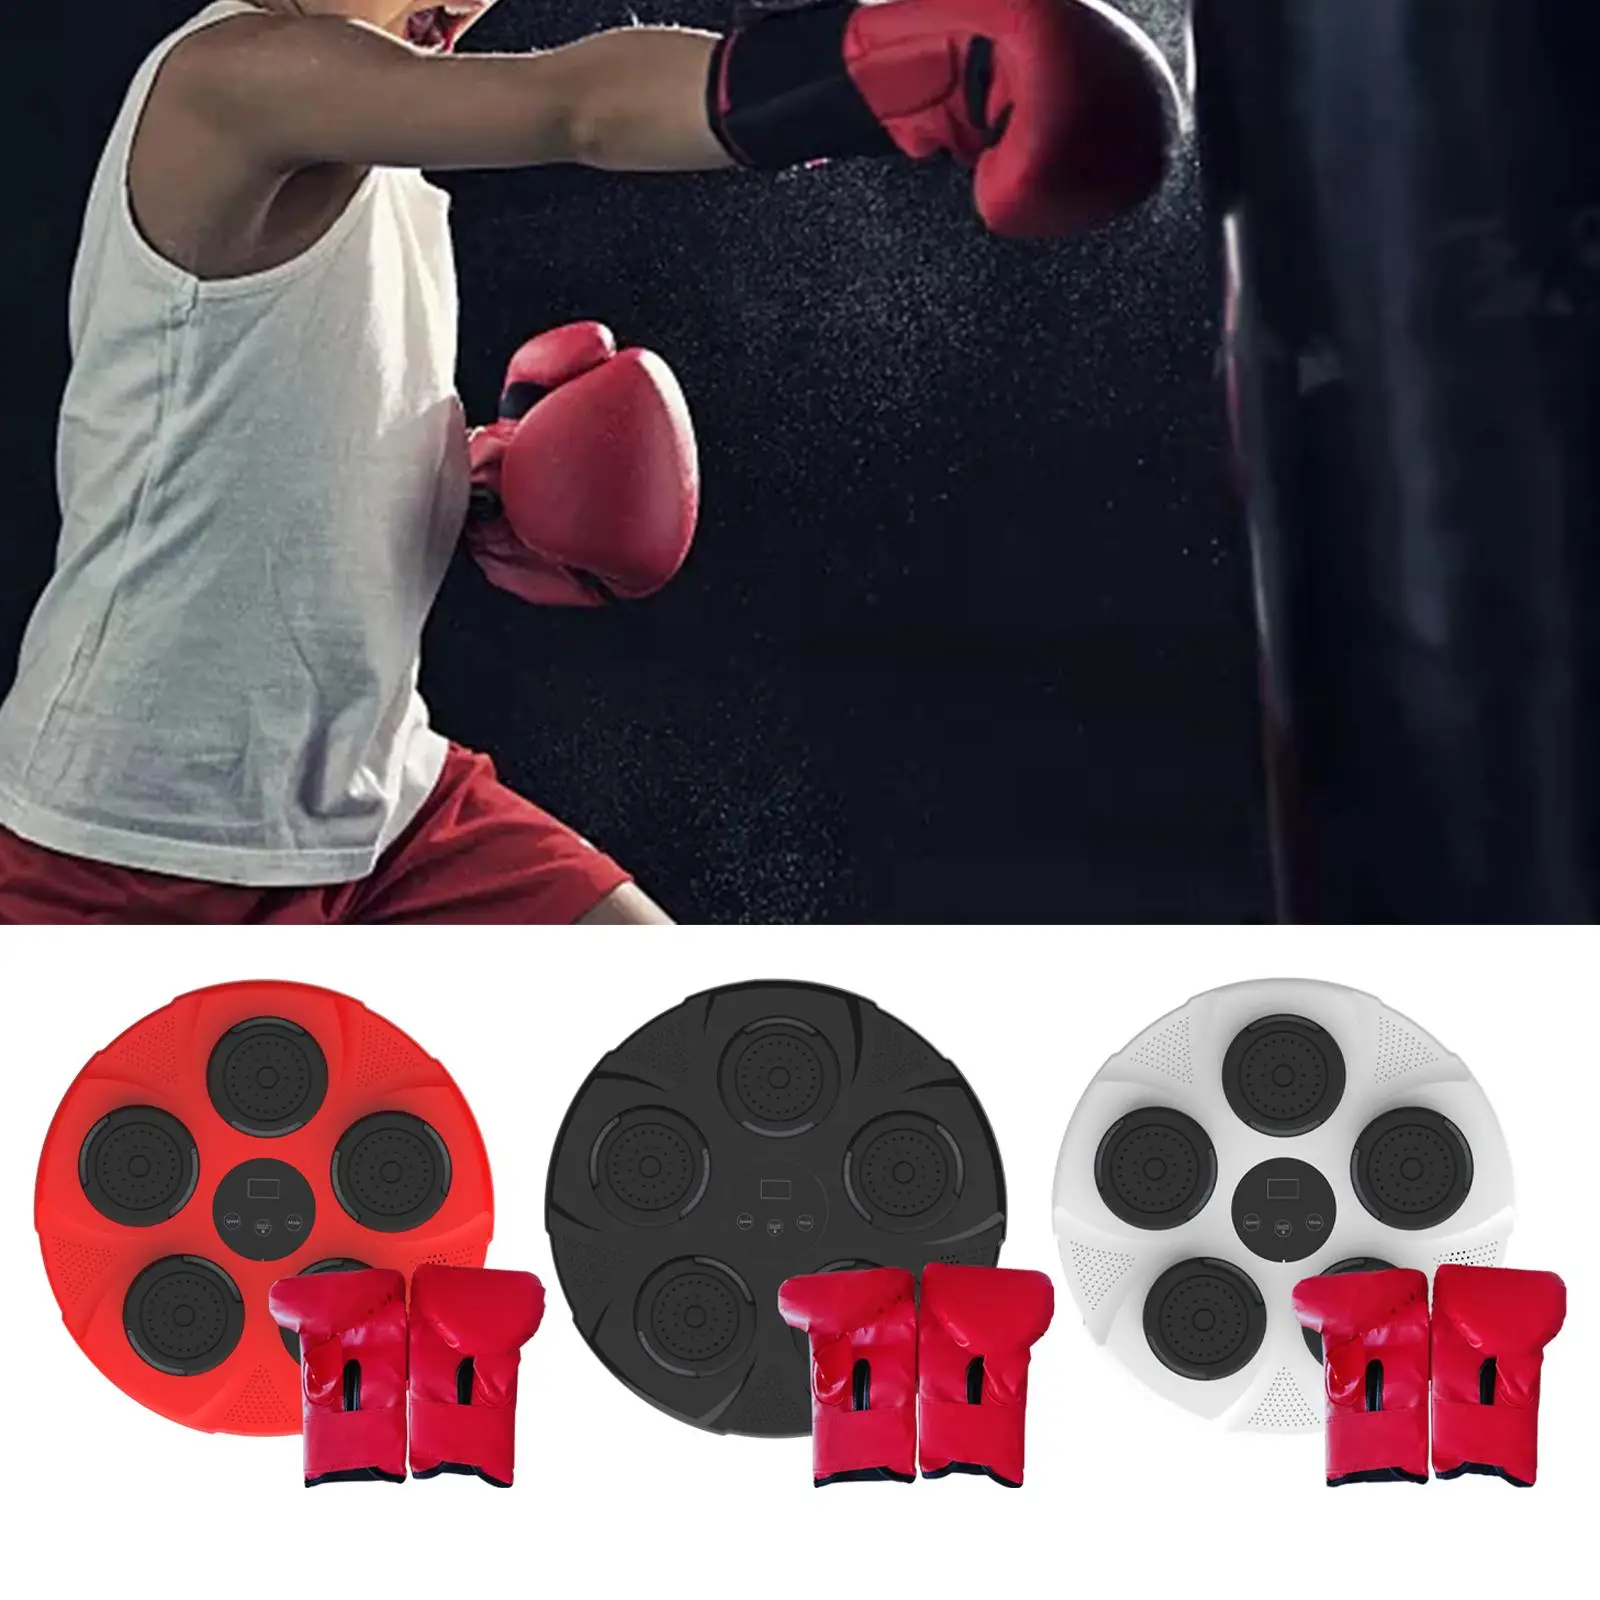 Boxing Machine Adjustable with Light for Practice Indoor Strength Training